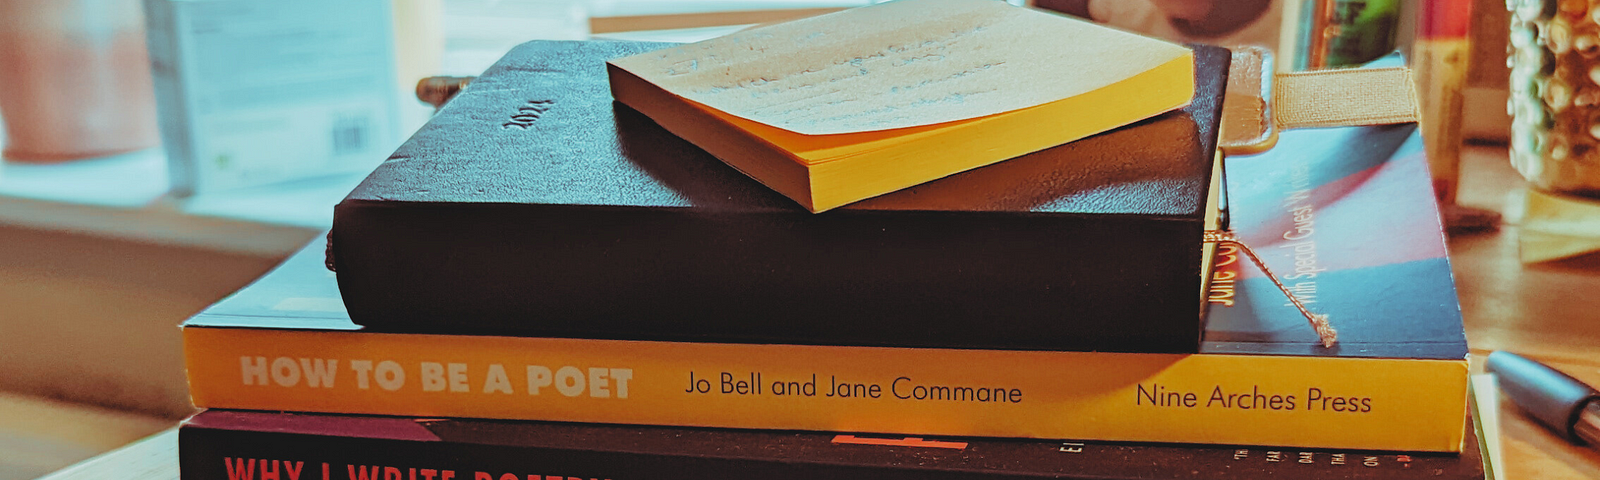 A stack of books on a desk. From bottom to top: The Poetry Review; Why I Write Poetr; How to be a Poet; 2024 diary; Post-its.